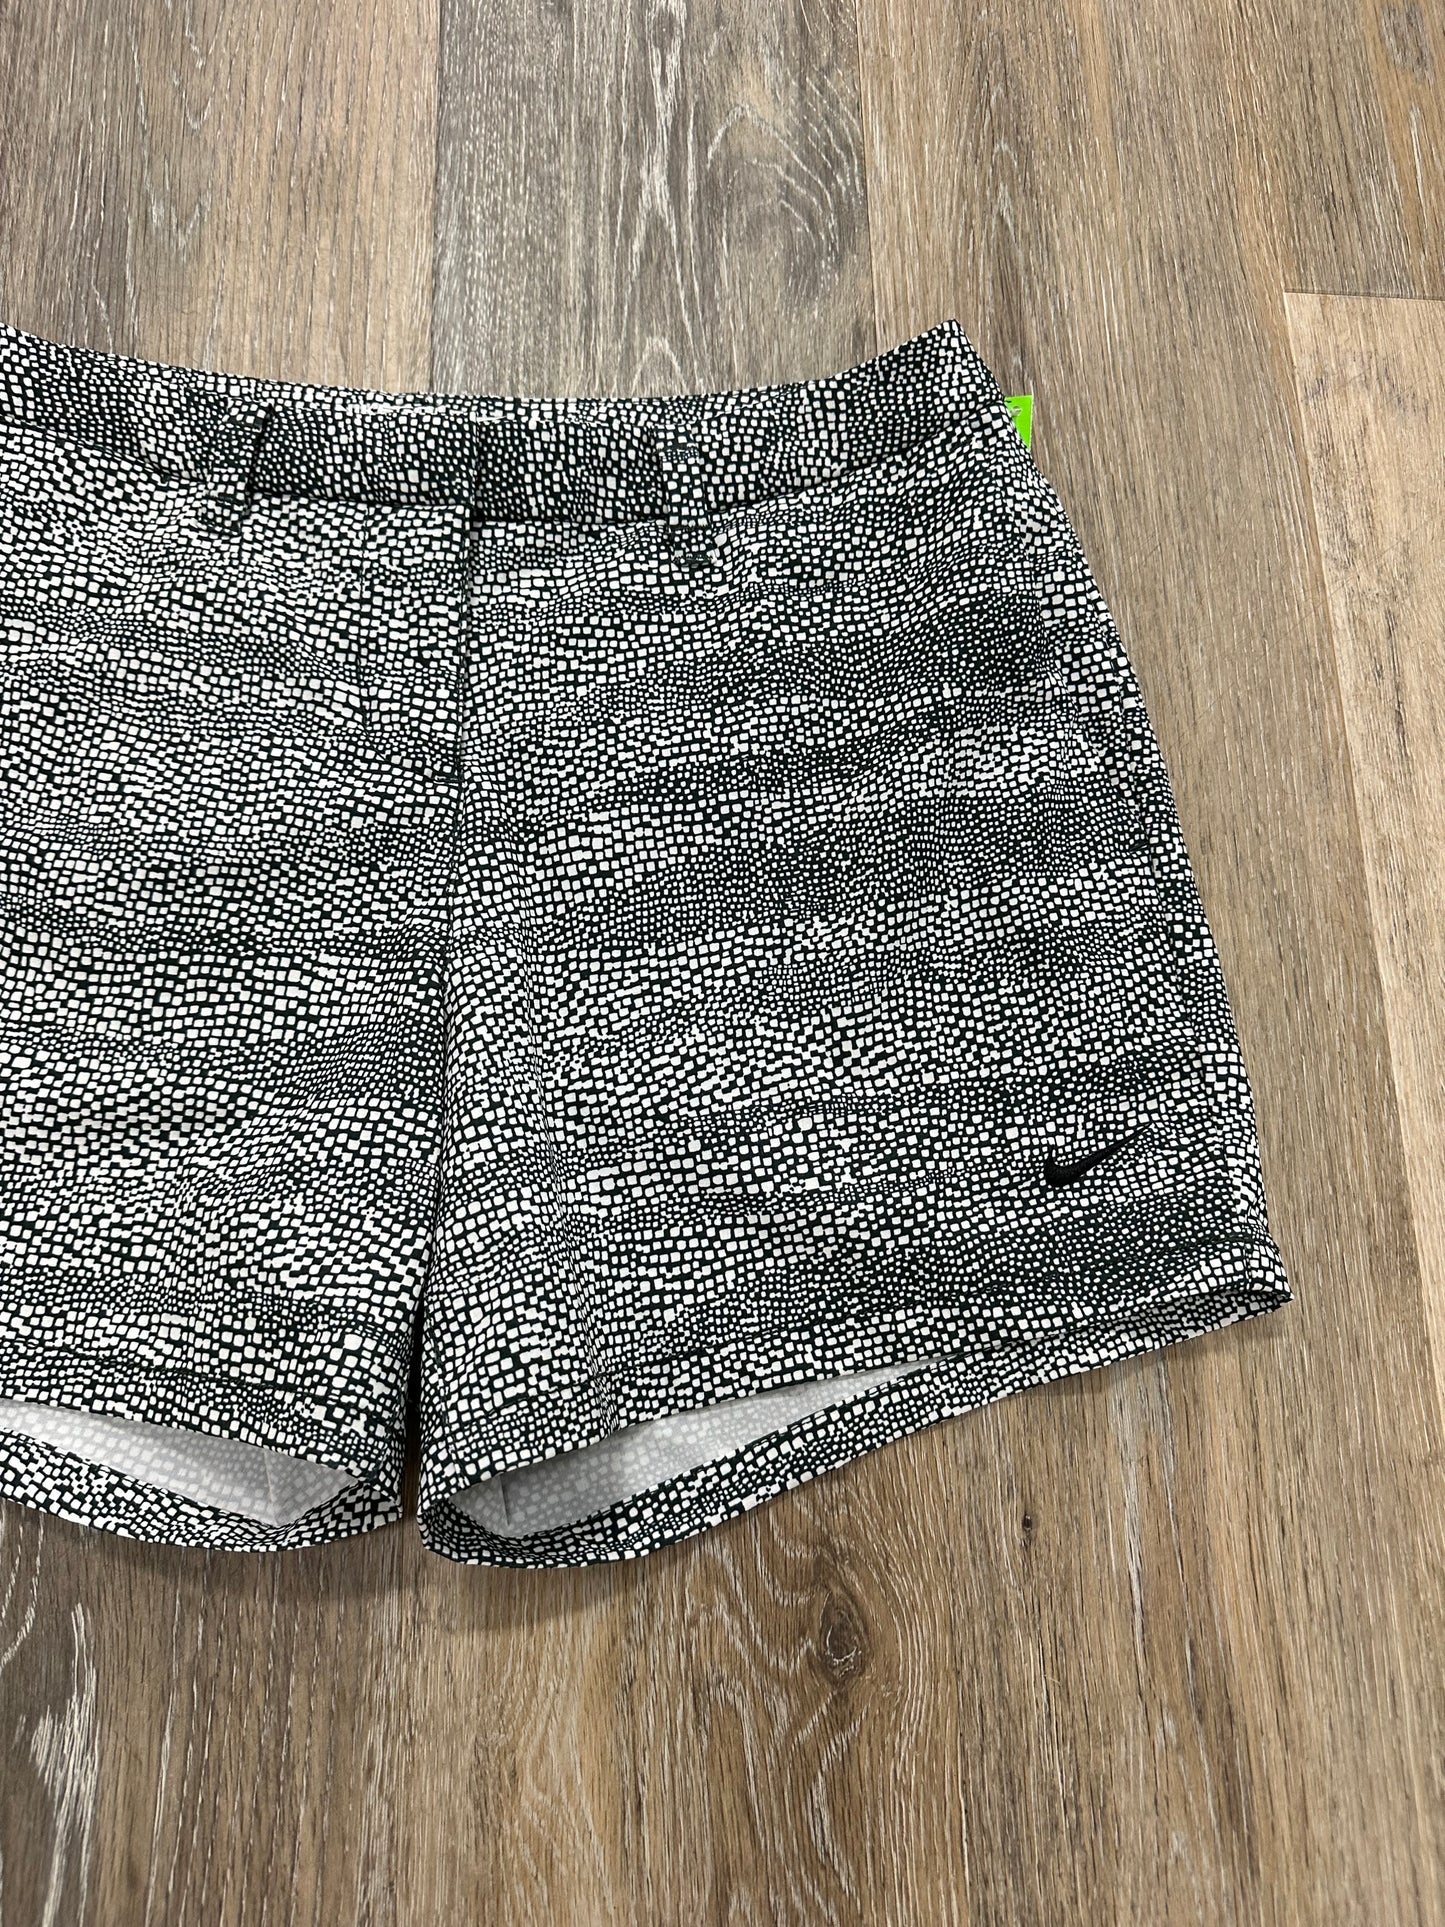 Athletic Shorts By Nike Apparel  Size: 2